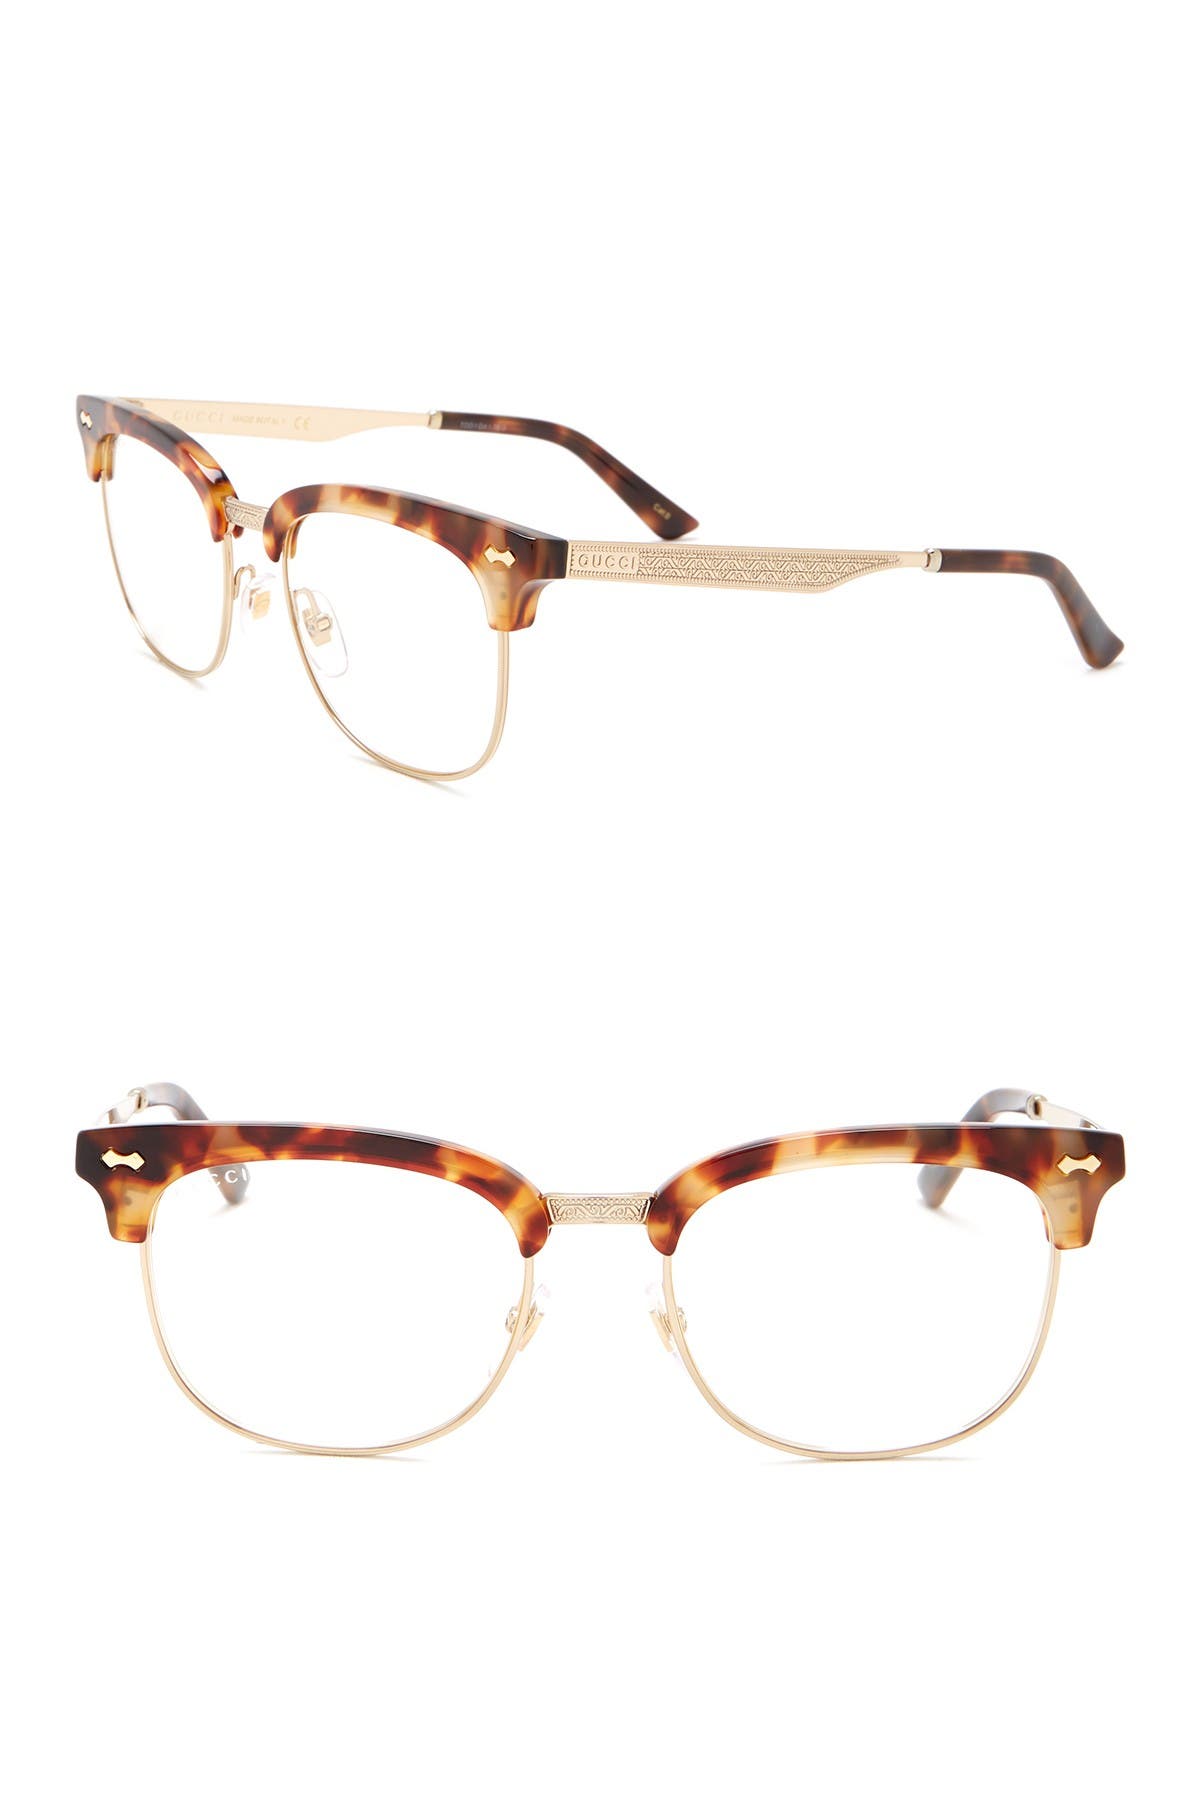 GUCCI | 52mm Clubmaster Optical Frames 